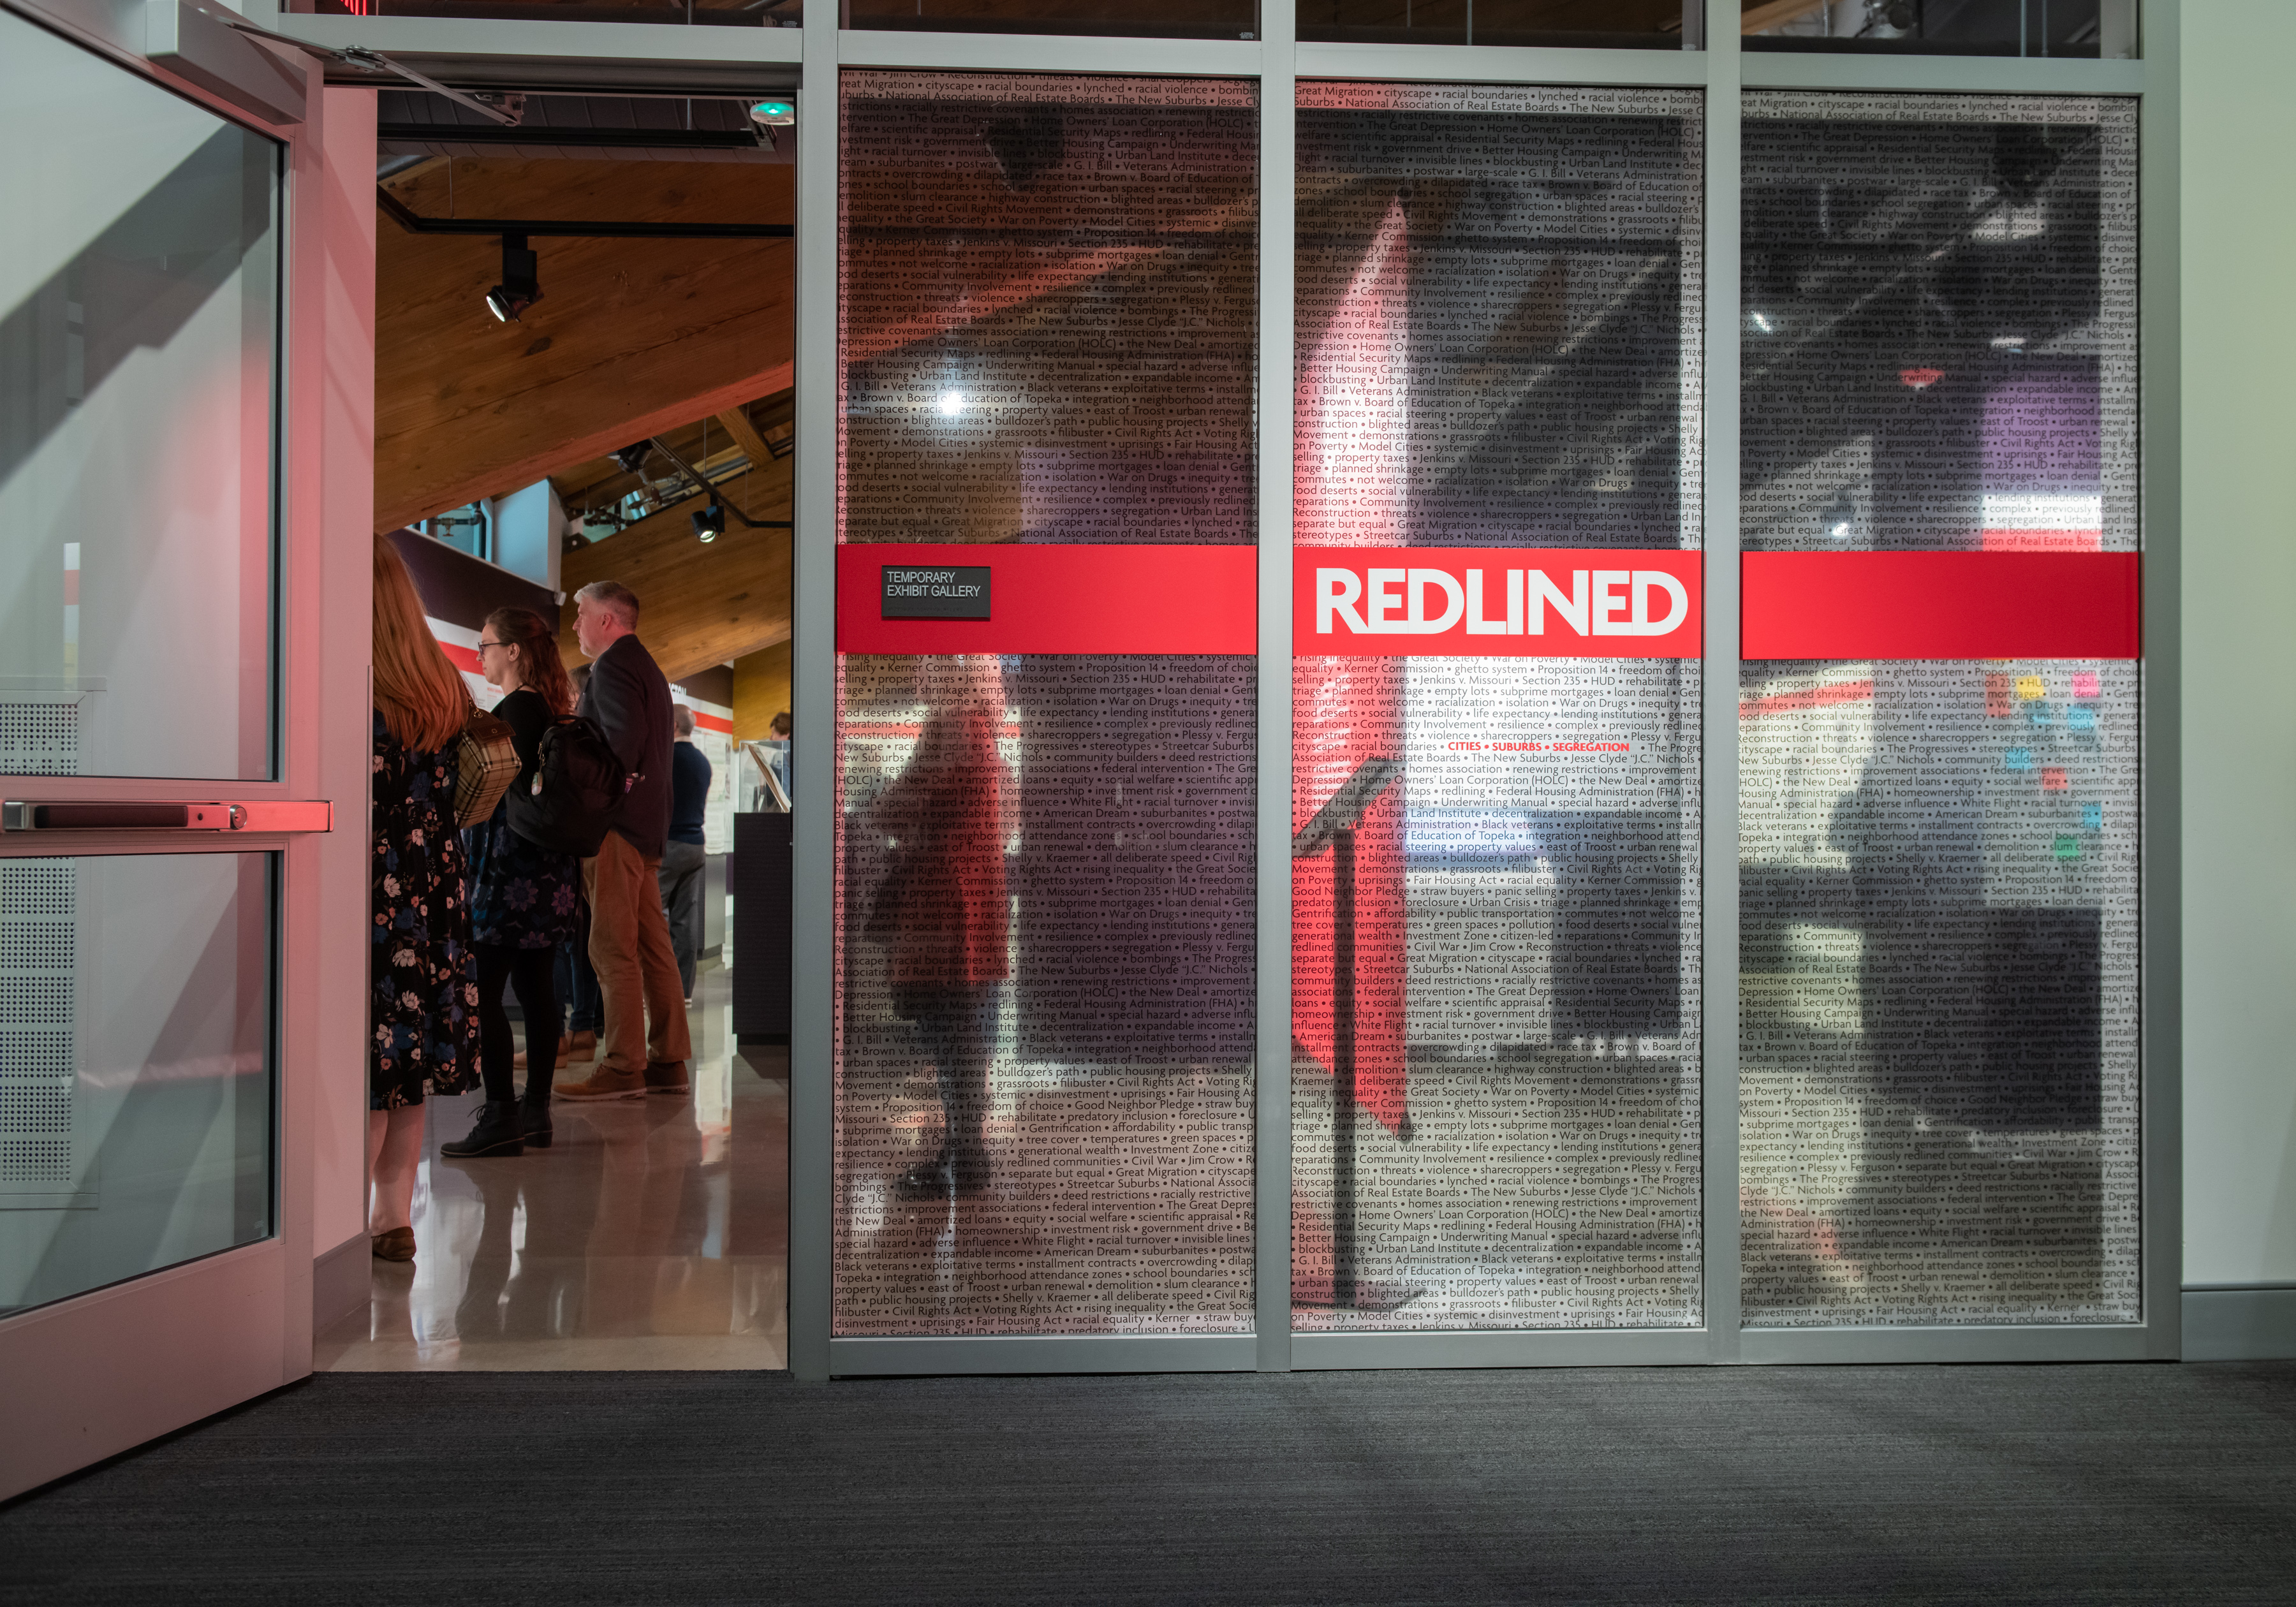 Photo of the entrance to the Museum's special exhibit gallery with the "REDLINED" title across the windows and a number of people standing and reading the exhibit within the space.